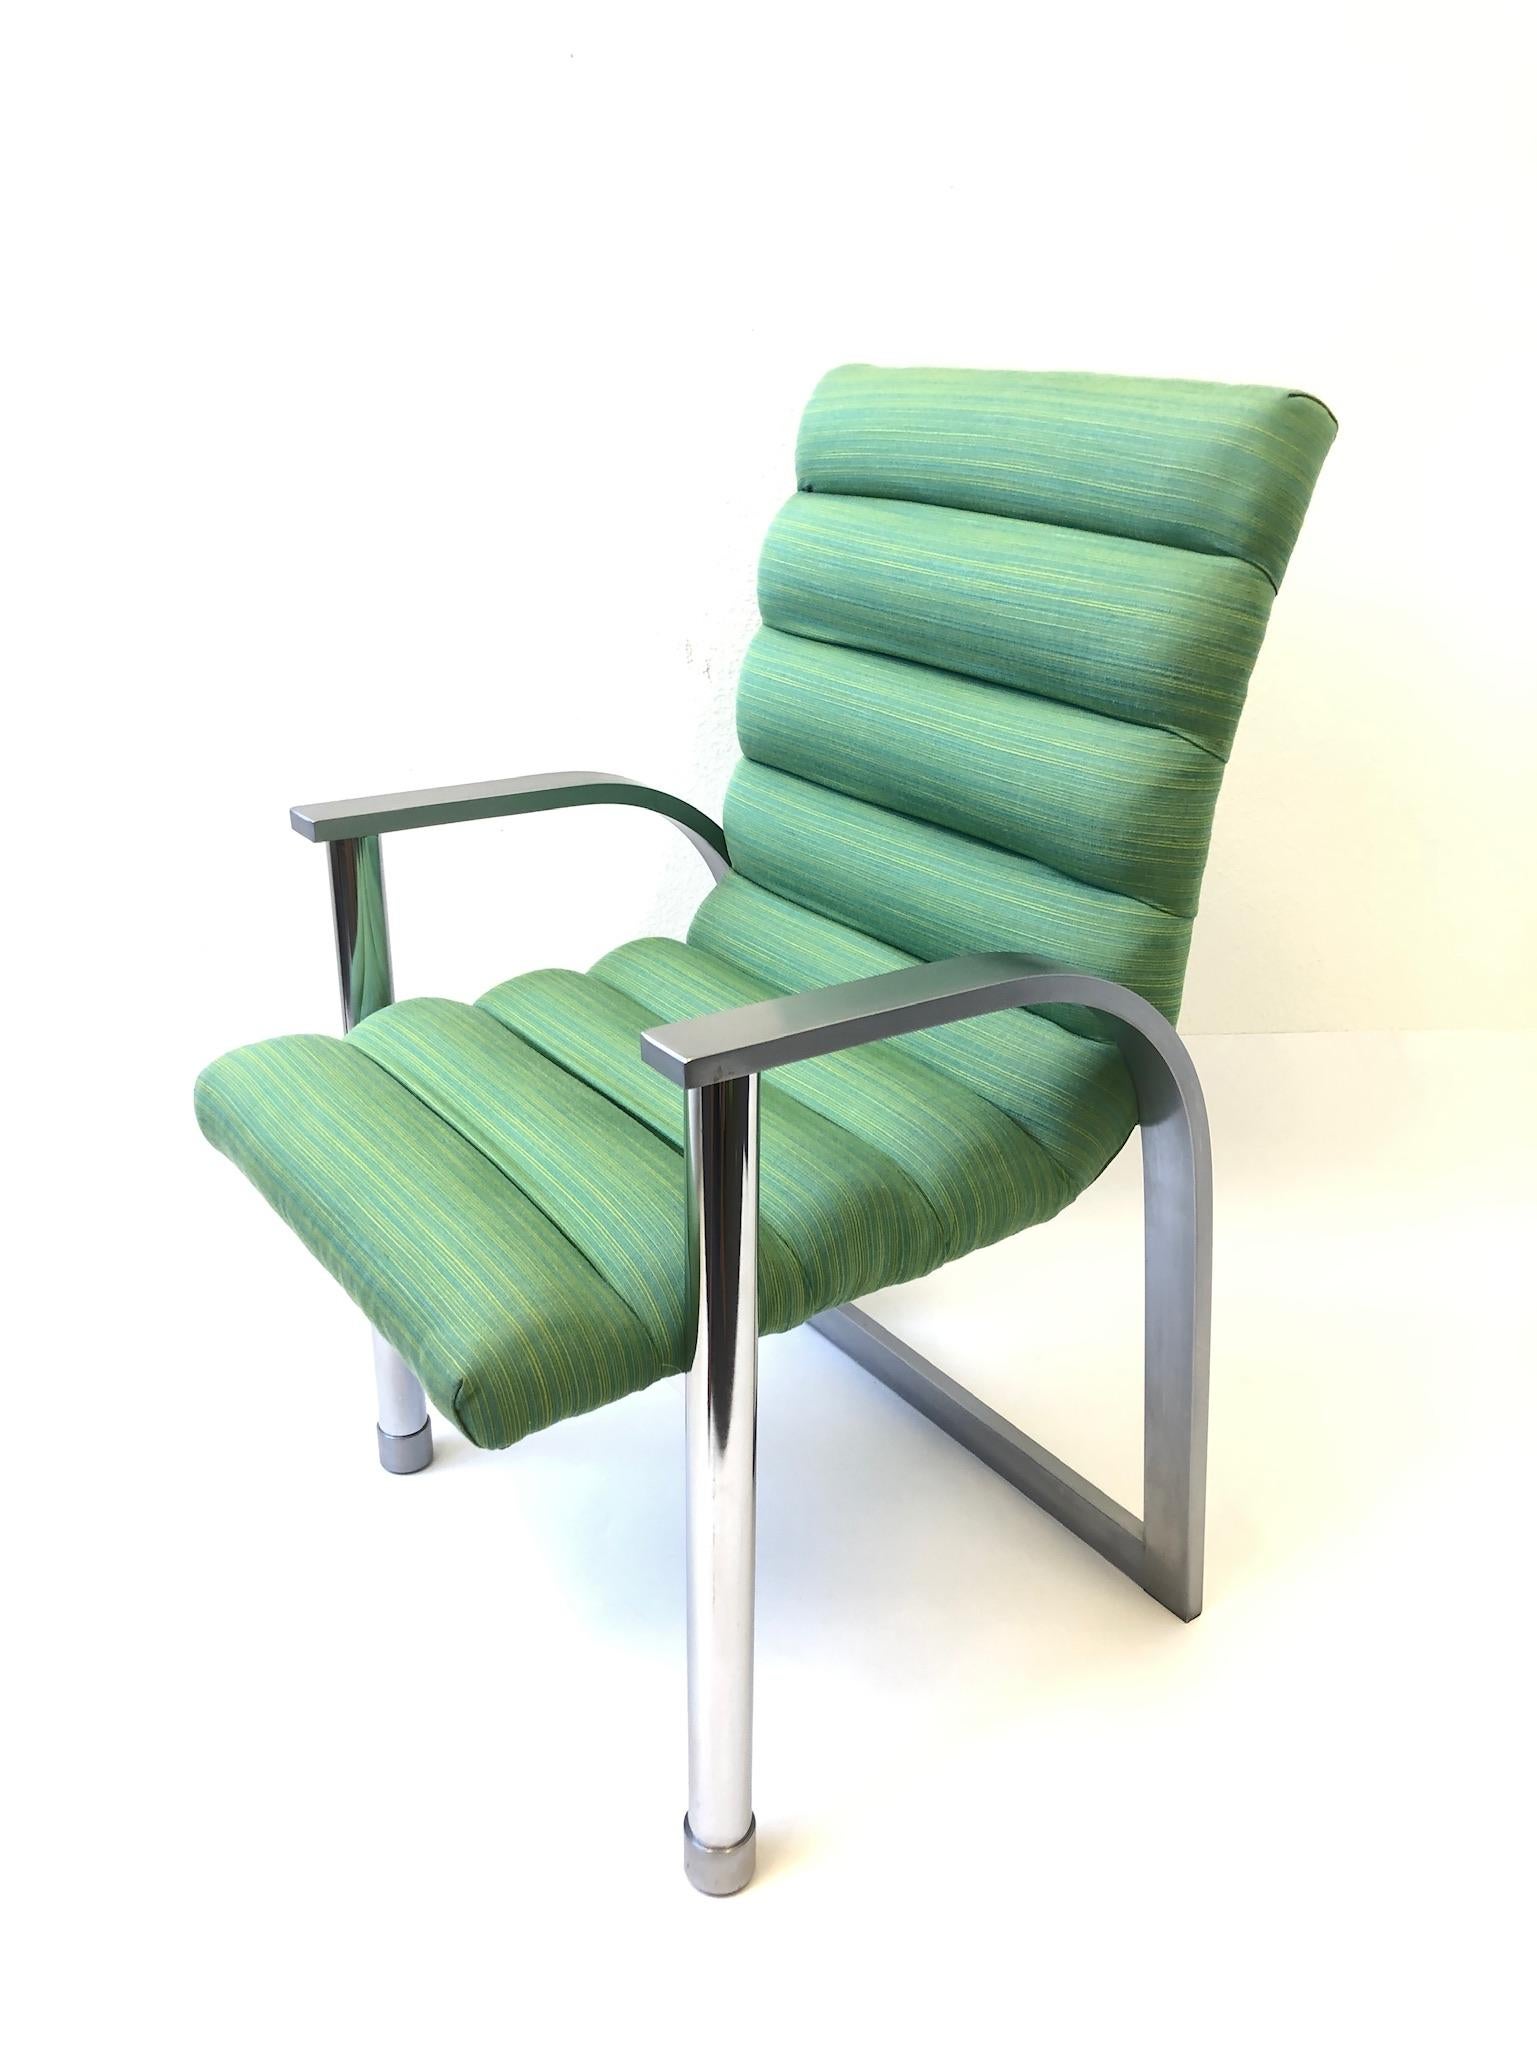 Set of Six Stainless Steel and Green Fabric Dining Chairs by Jay Spectre For Sale 2